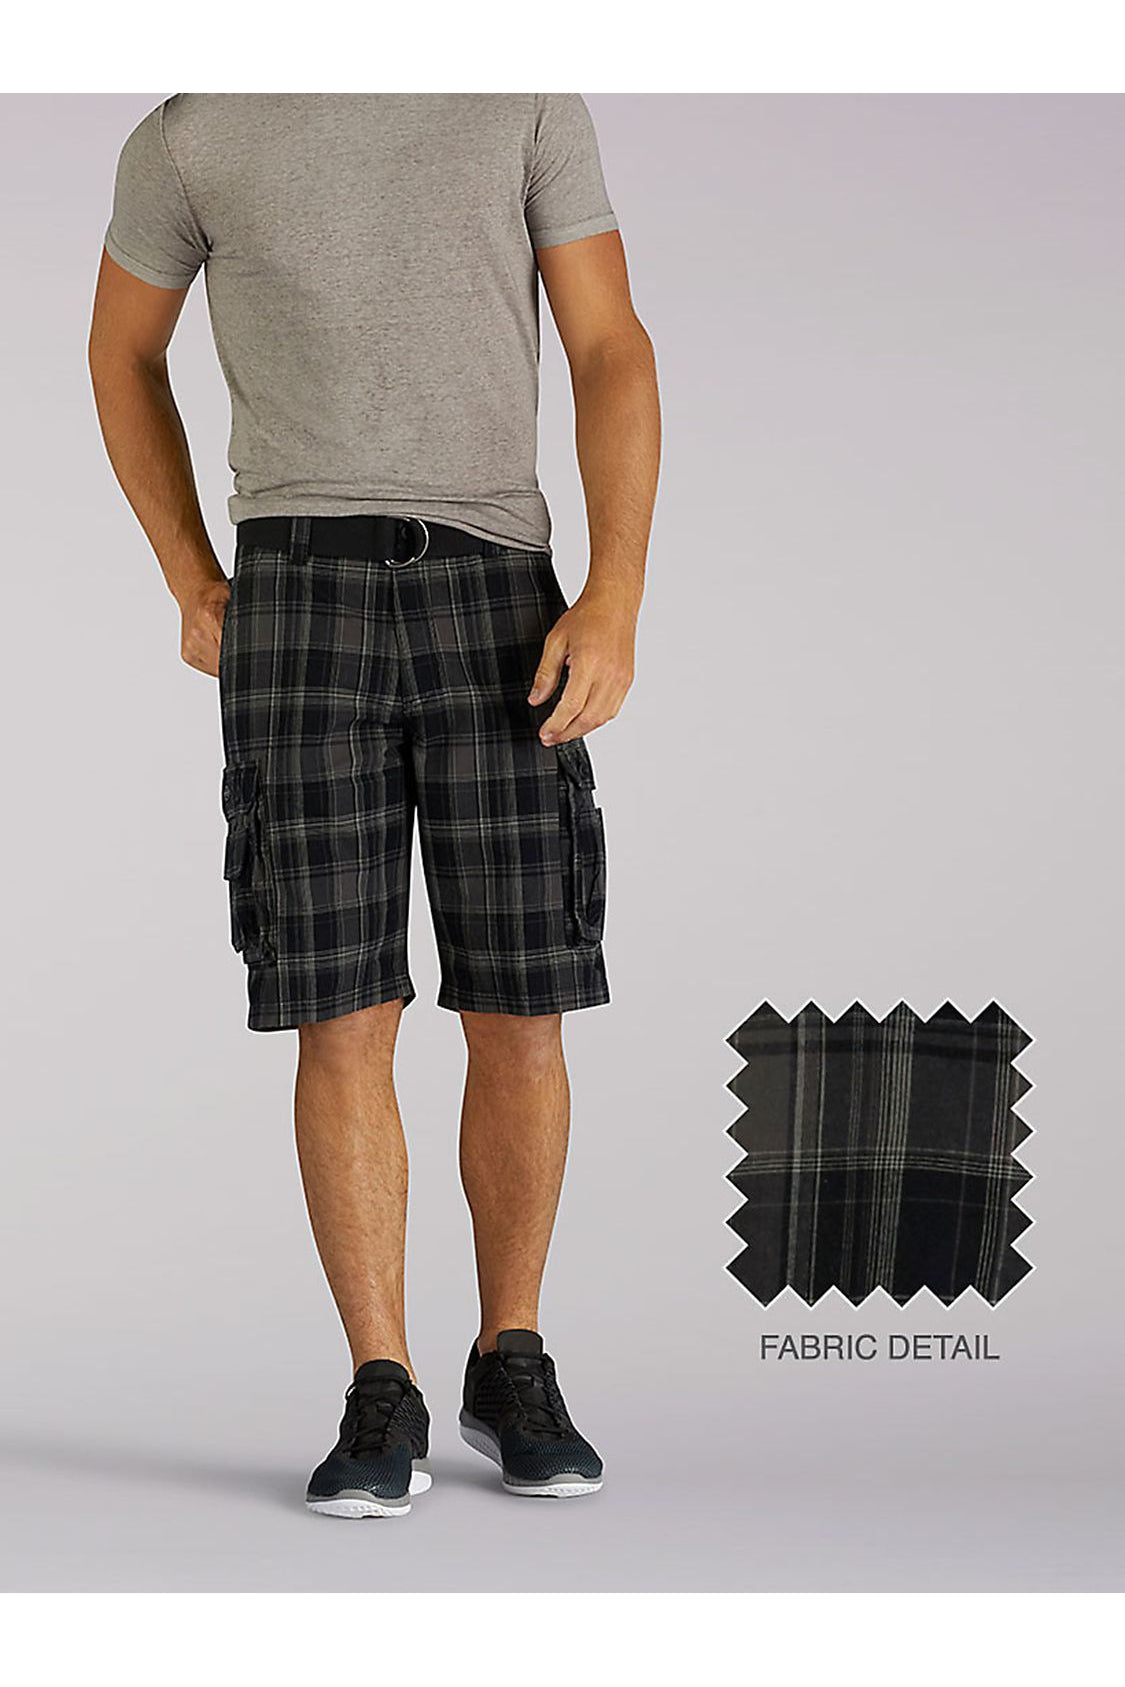 Big and Tall Wyoming Cargo Short in Black Clifton Plaid from Front View